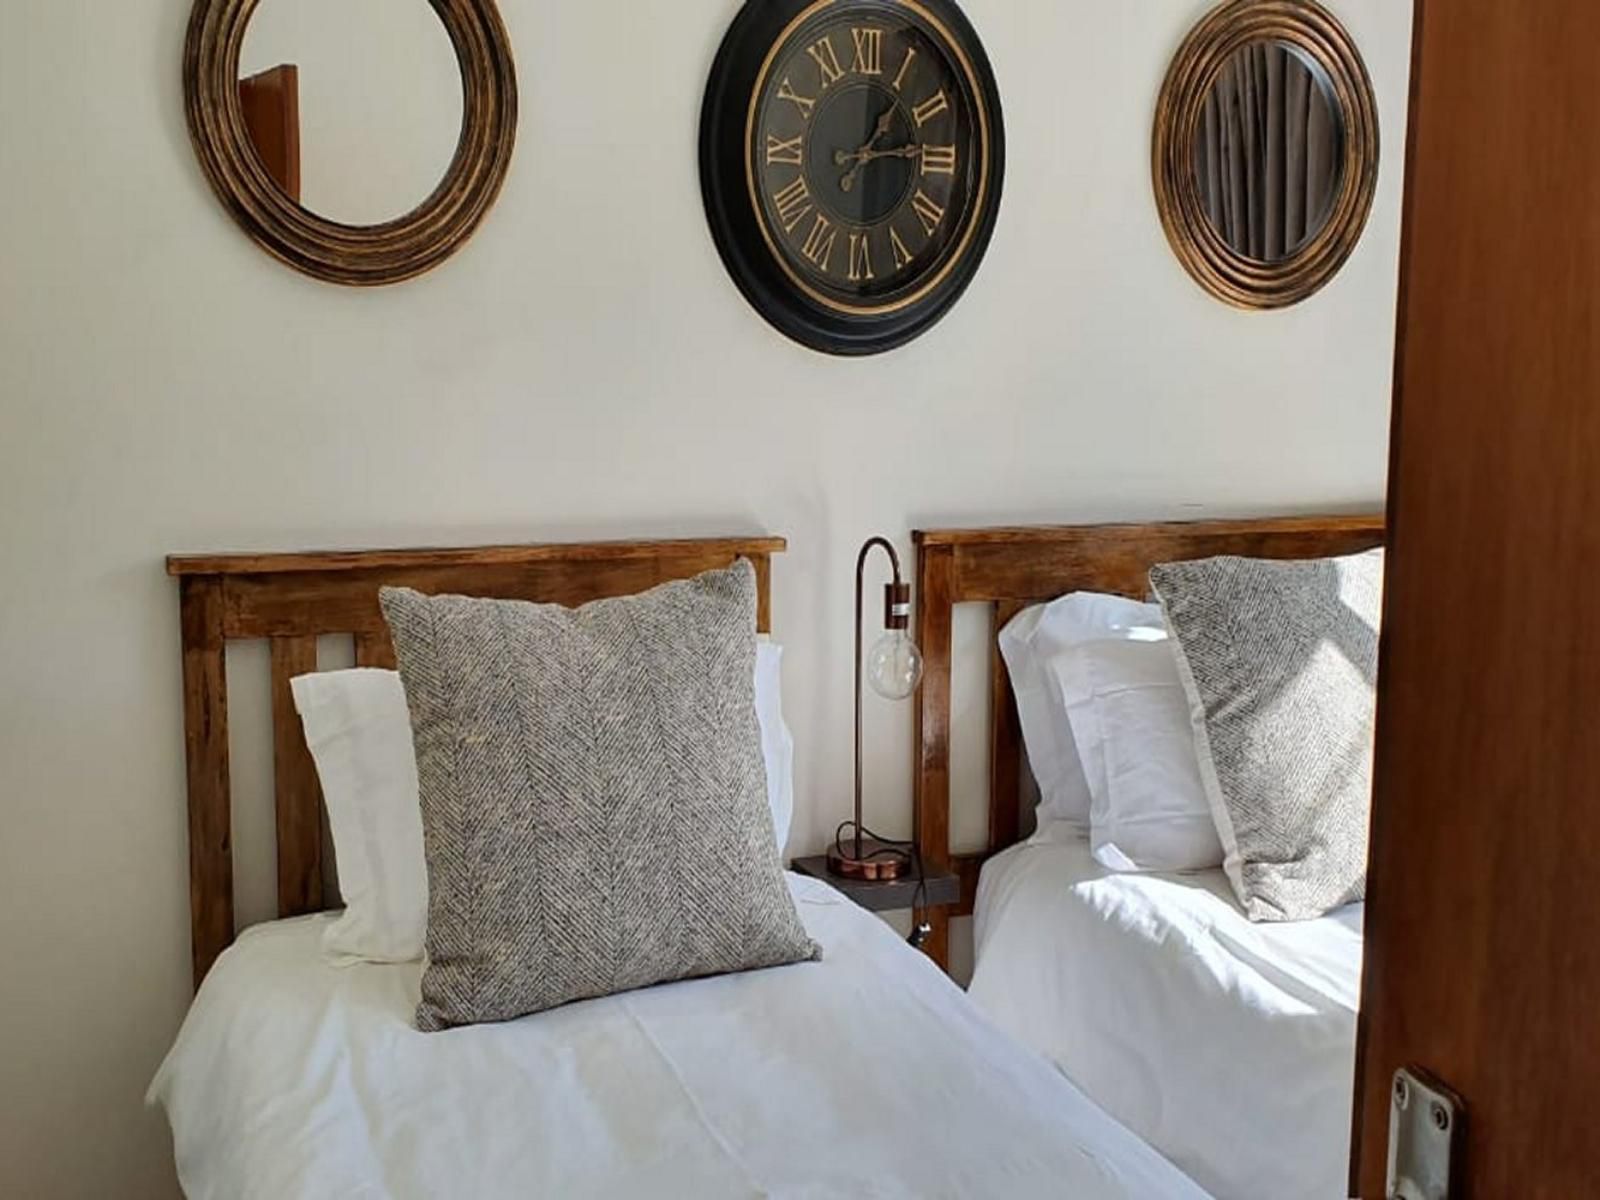 Patrick S View Self Catering Apartments Blanco George Western Cape South Africa Bedroom